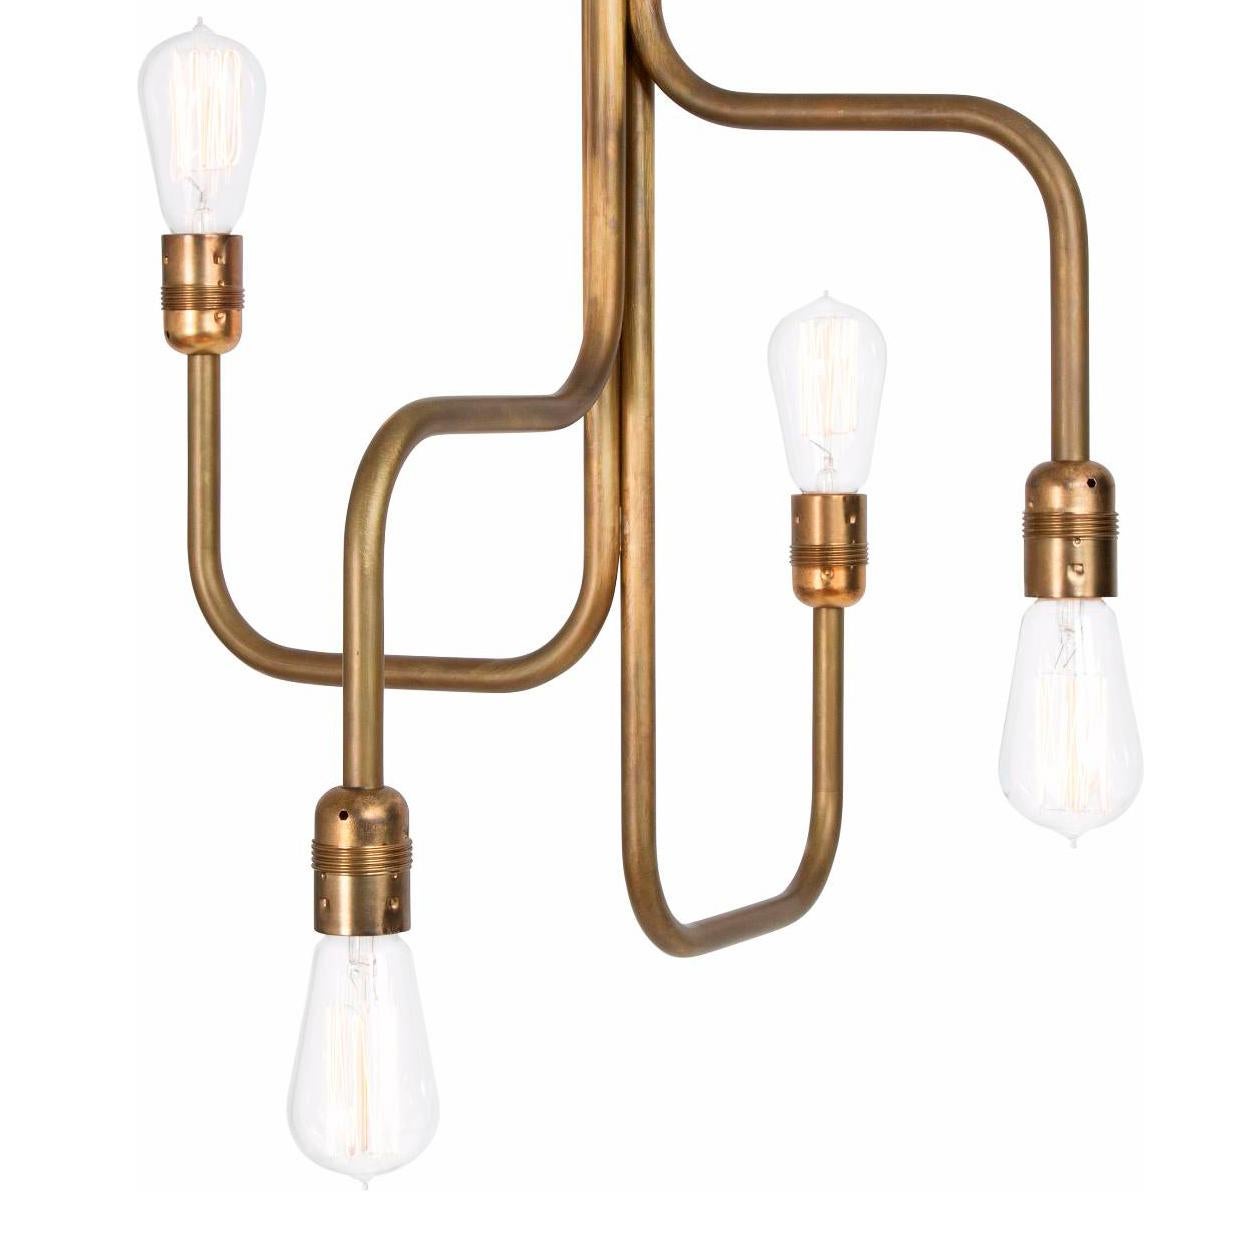 Ceiling lamp designed by Sabina Grubbeson manufactured by Konsthantverk Tyringe in Sweden.

Strapatz ceiling small
D. 450 mm
H. 600 mm, cord 3 m 
Max 4 x 60 W E27 
3414-6 raw brass

The lamps are wiring with standard Europe wiring.

Strapatz pendant